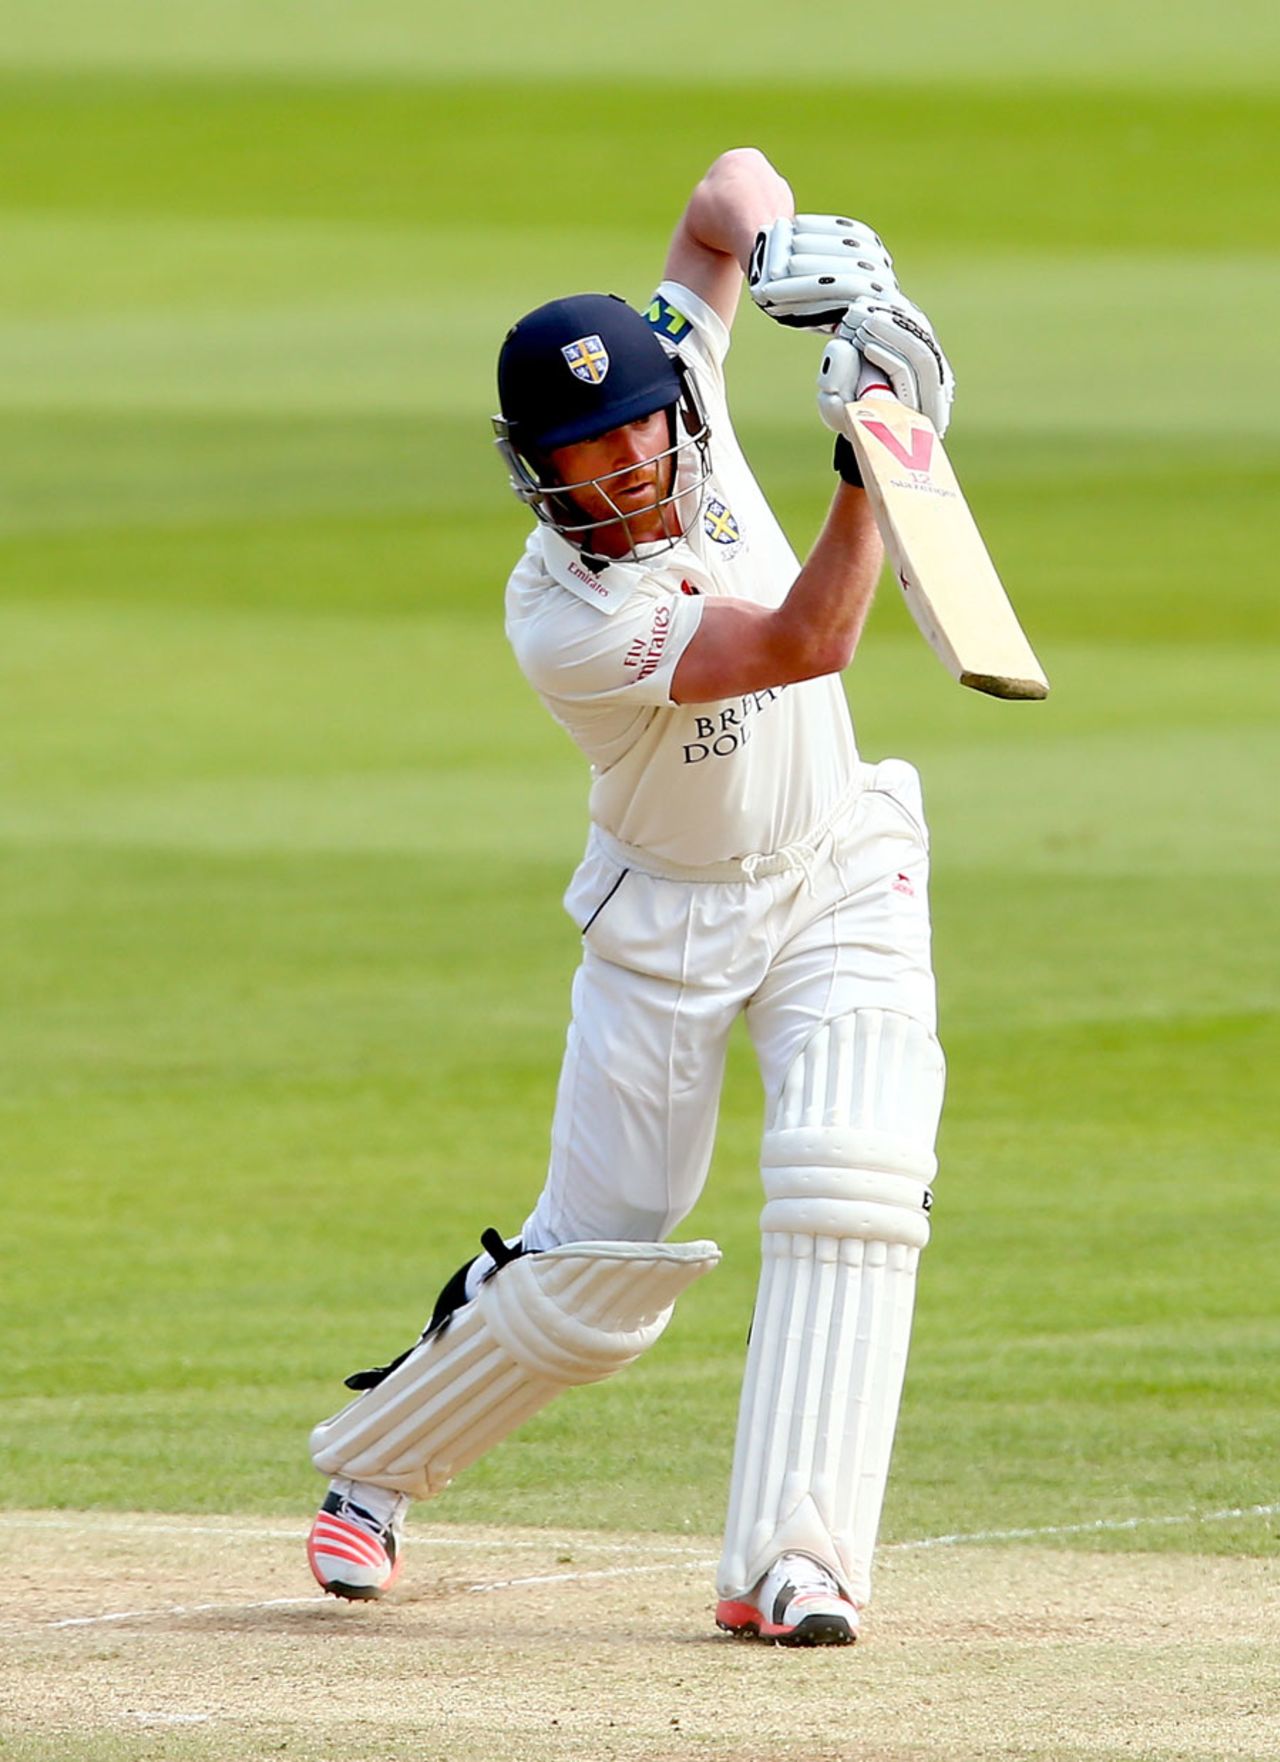 Paul Collingwood drives on his way to an unbeaten 38, Middlesex v Durham, County Championship Division One, Lord's, 3rd day, May 4, 2015